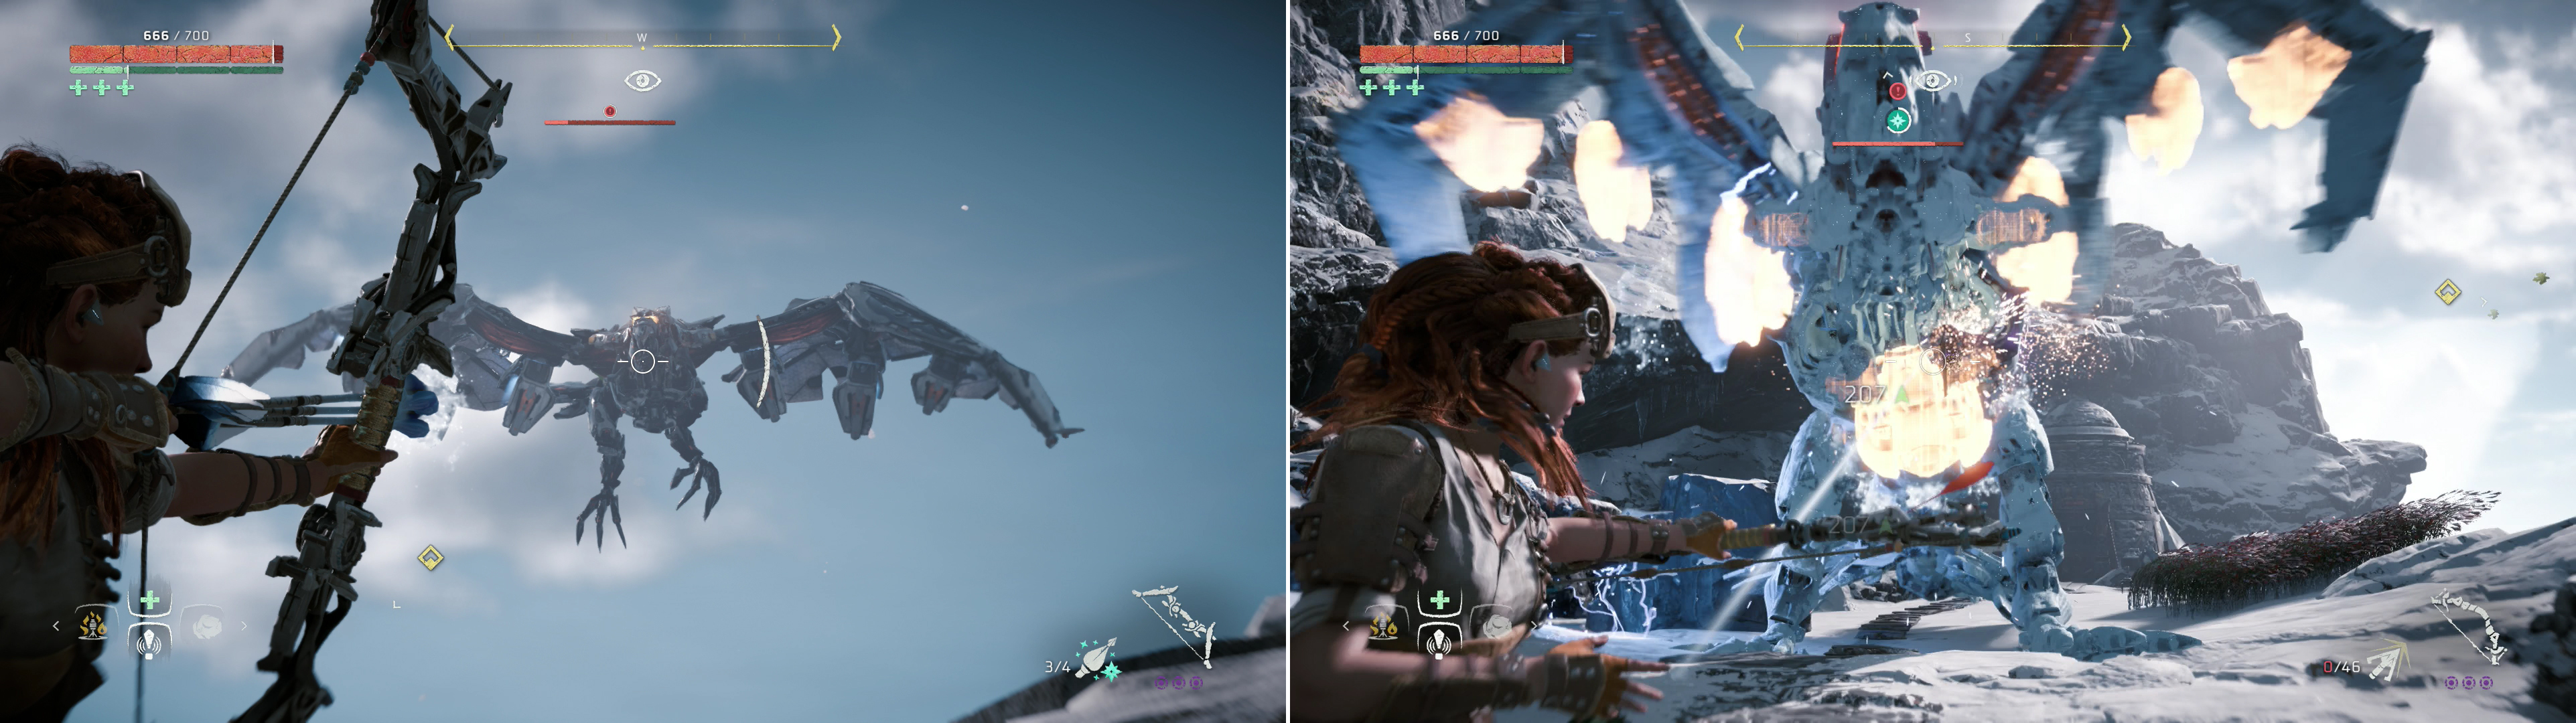 Pelt the Stormbird with Freeze Arrows to knock it out of the sky (left) and leave it more vulnerable to impact damage (right).